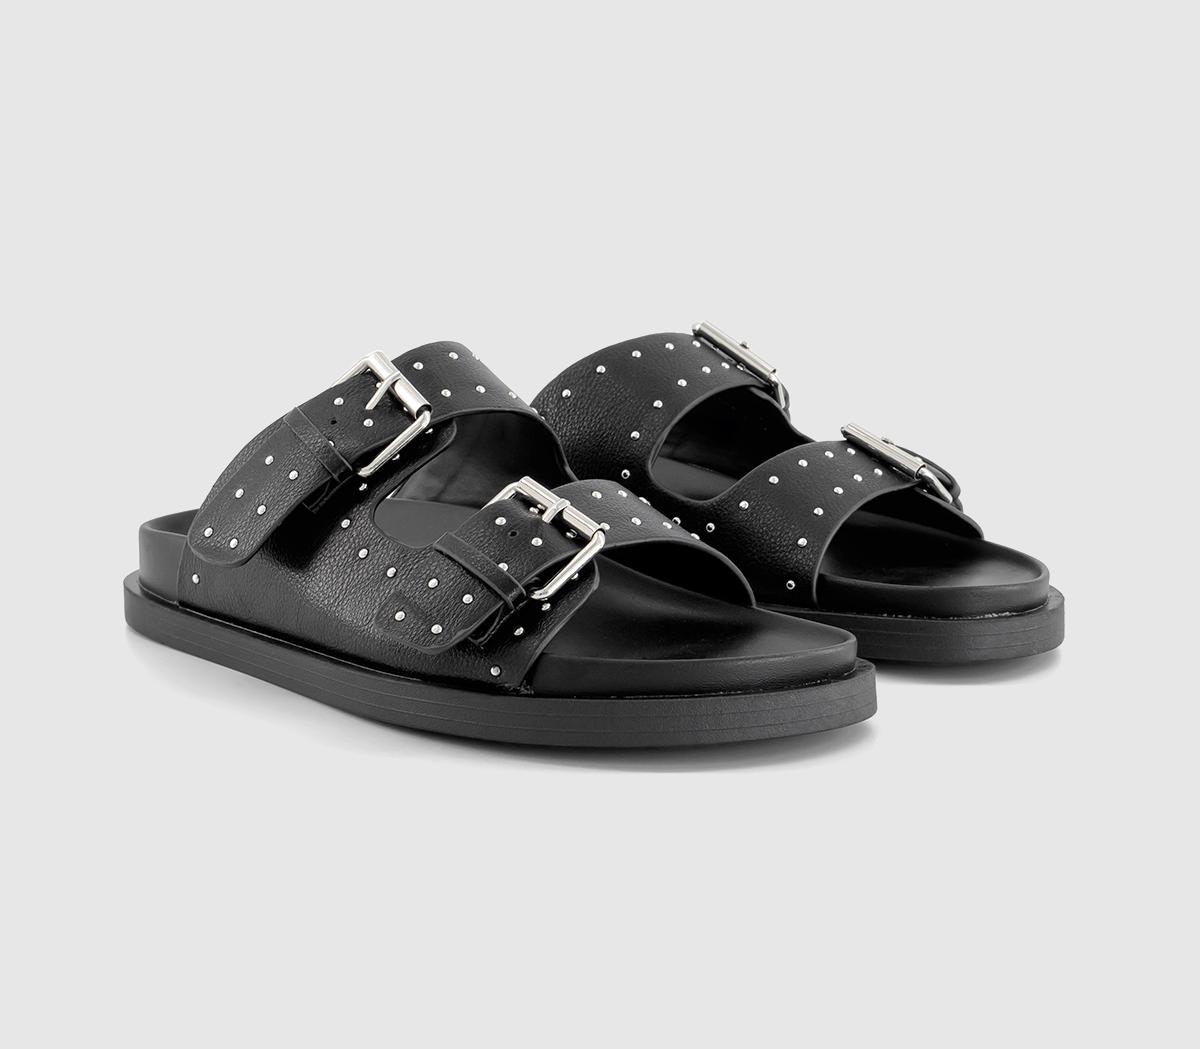 OFFICE Womens Scarlett Double Strap Studded Footbed Sandals Black, 8